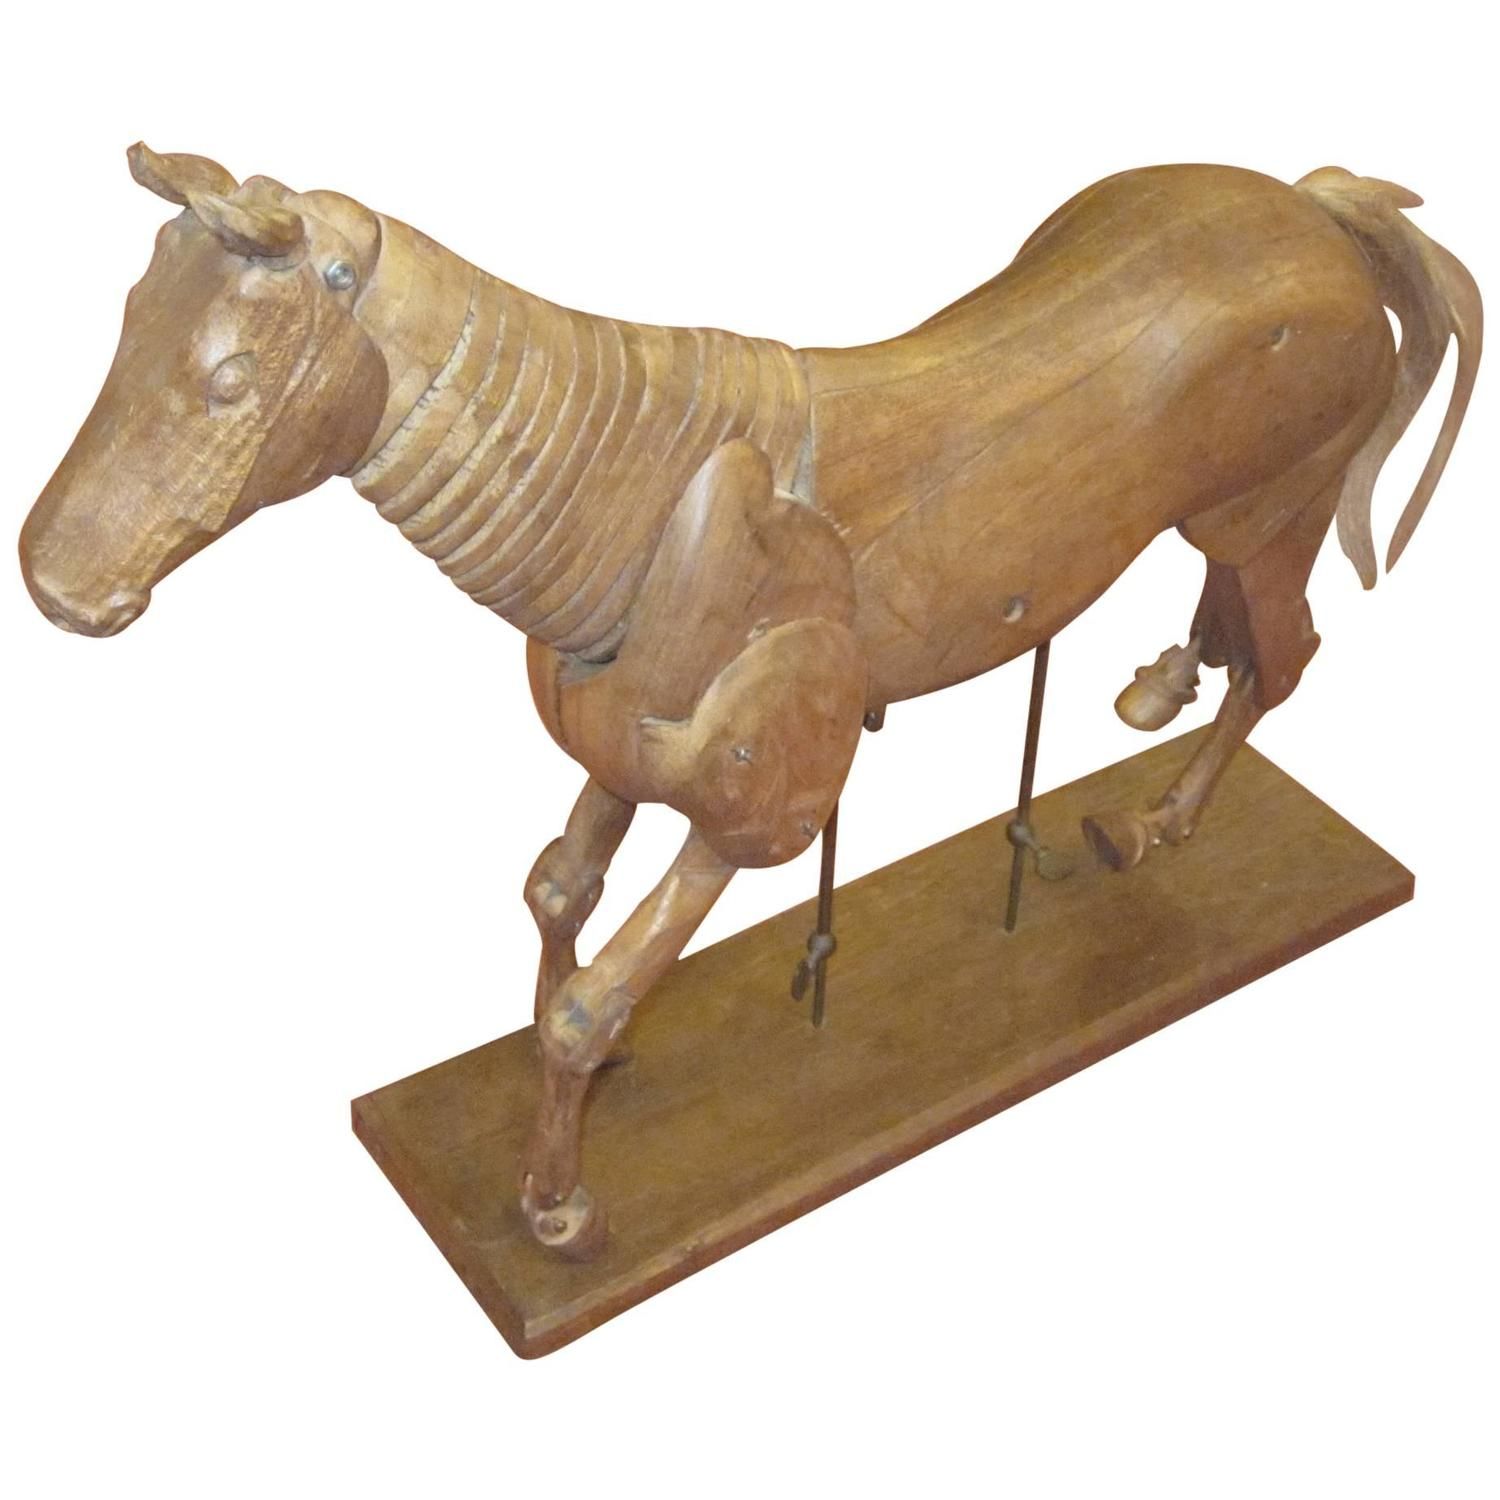 Articulated Wooden Horse Sculpture, Italy, 1920s | Wooden horse and ...